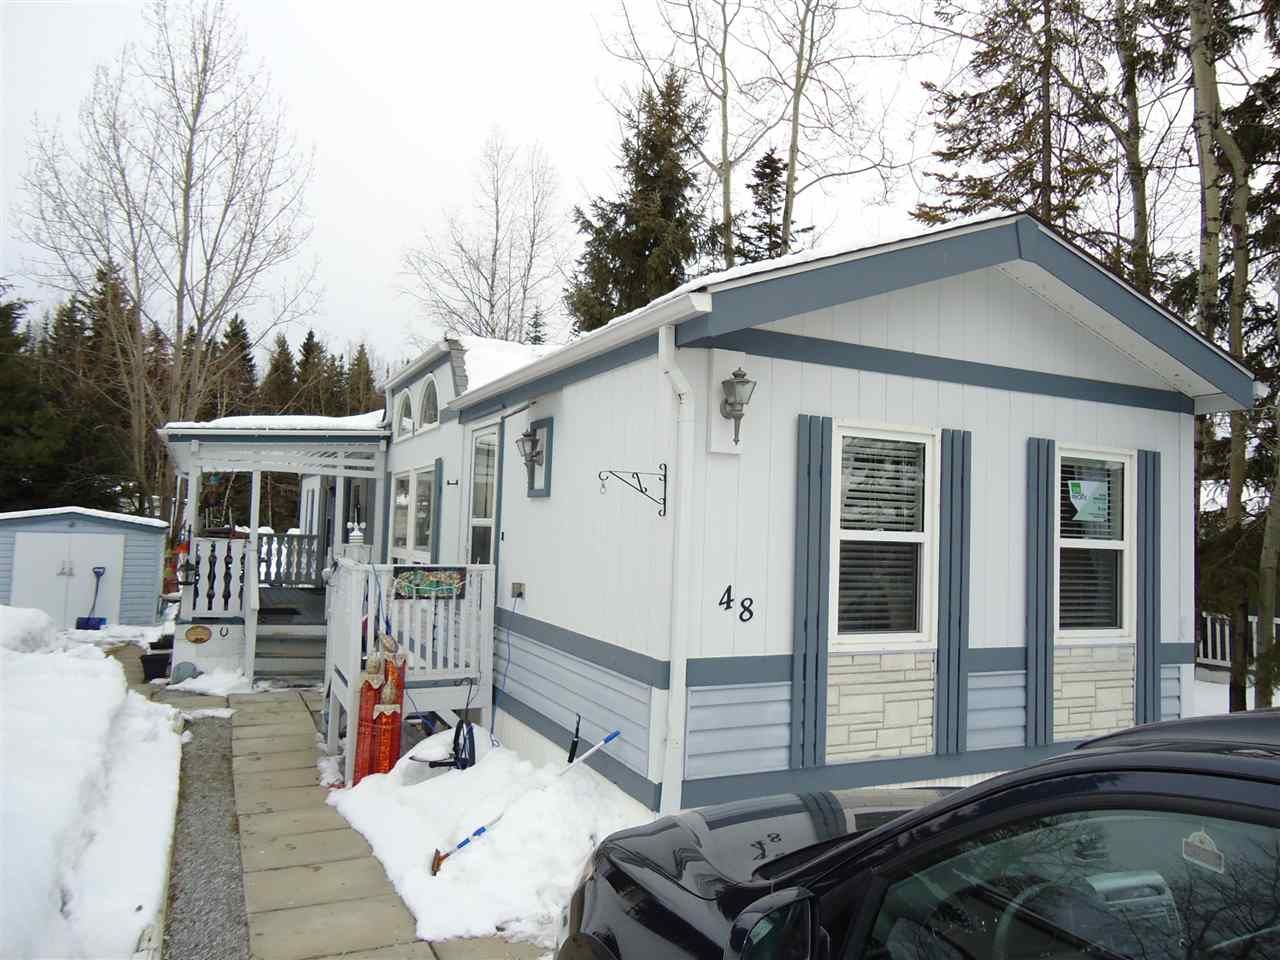 I have sold a property at 48 7817 97 HWY S in Prince George
